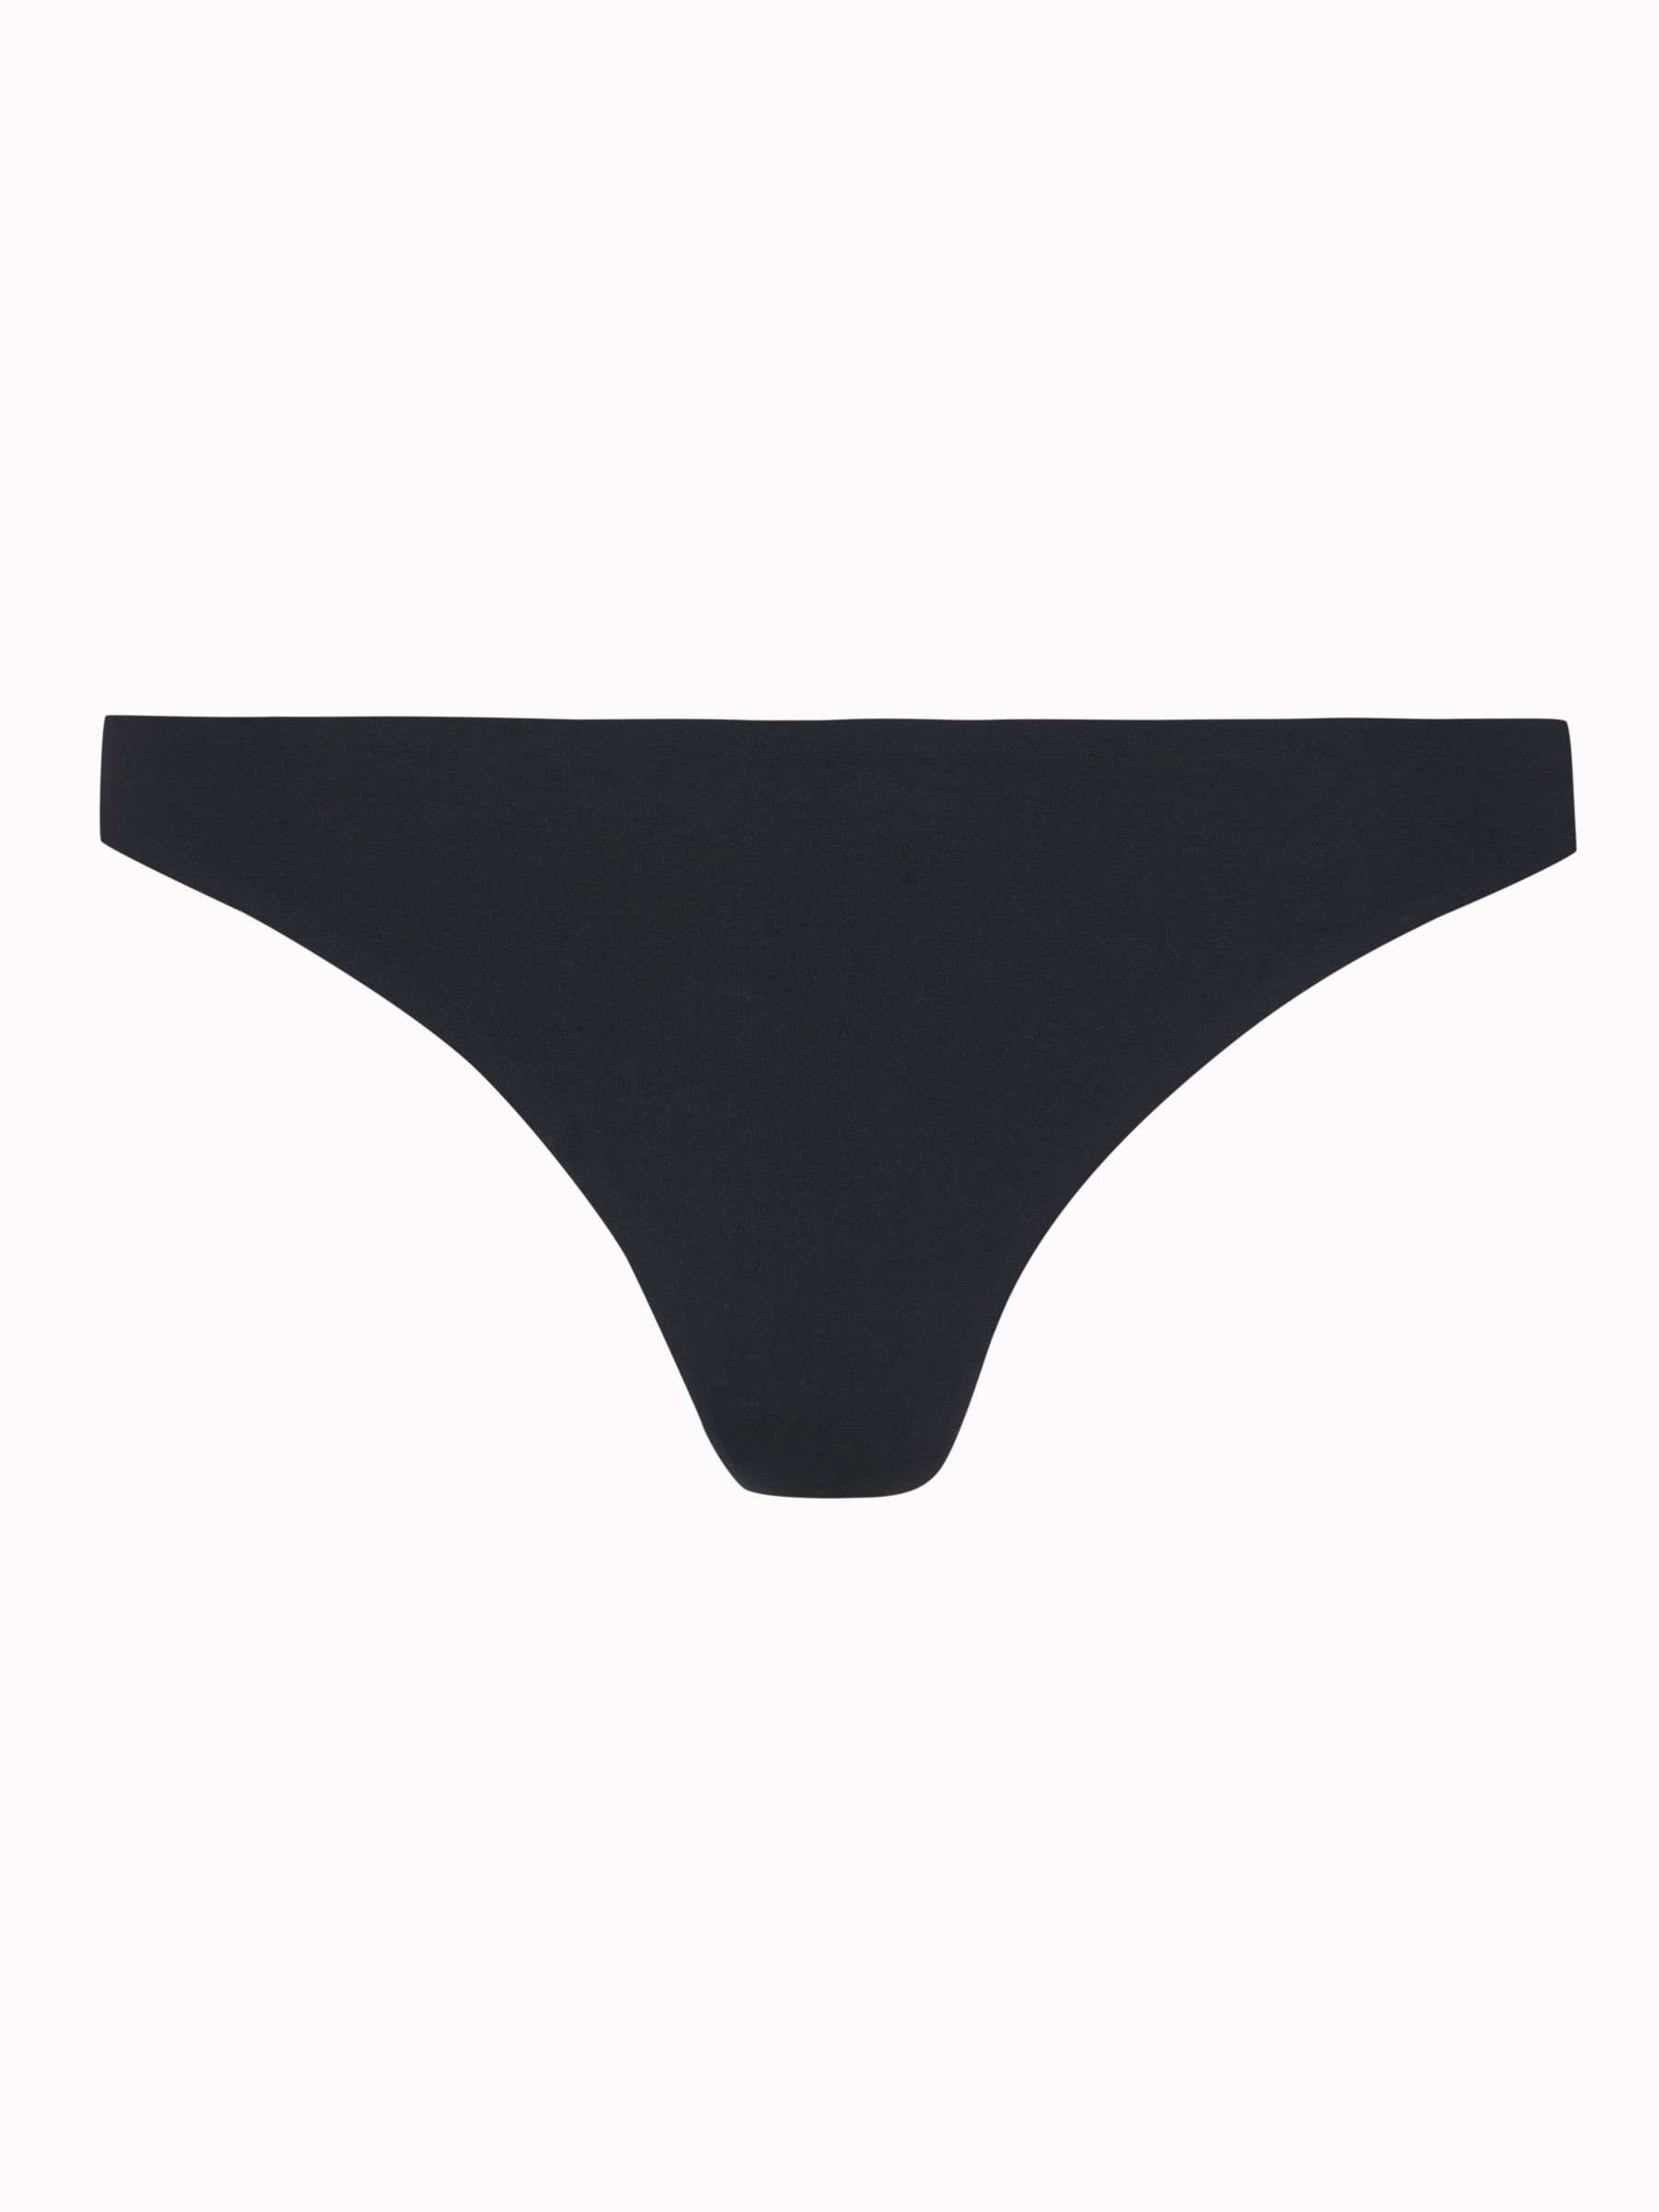 Sweaty Betty Barely There Thong, Black at John Lewis & Partners